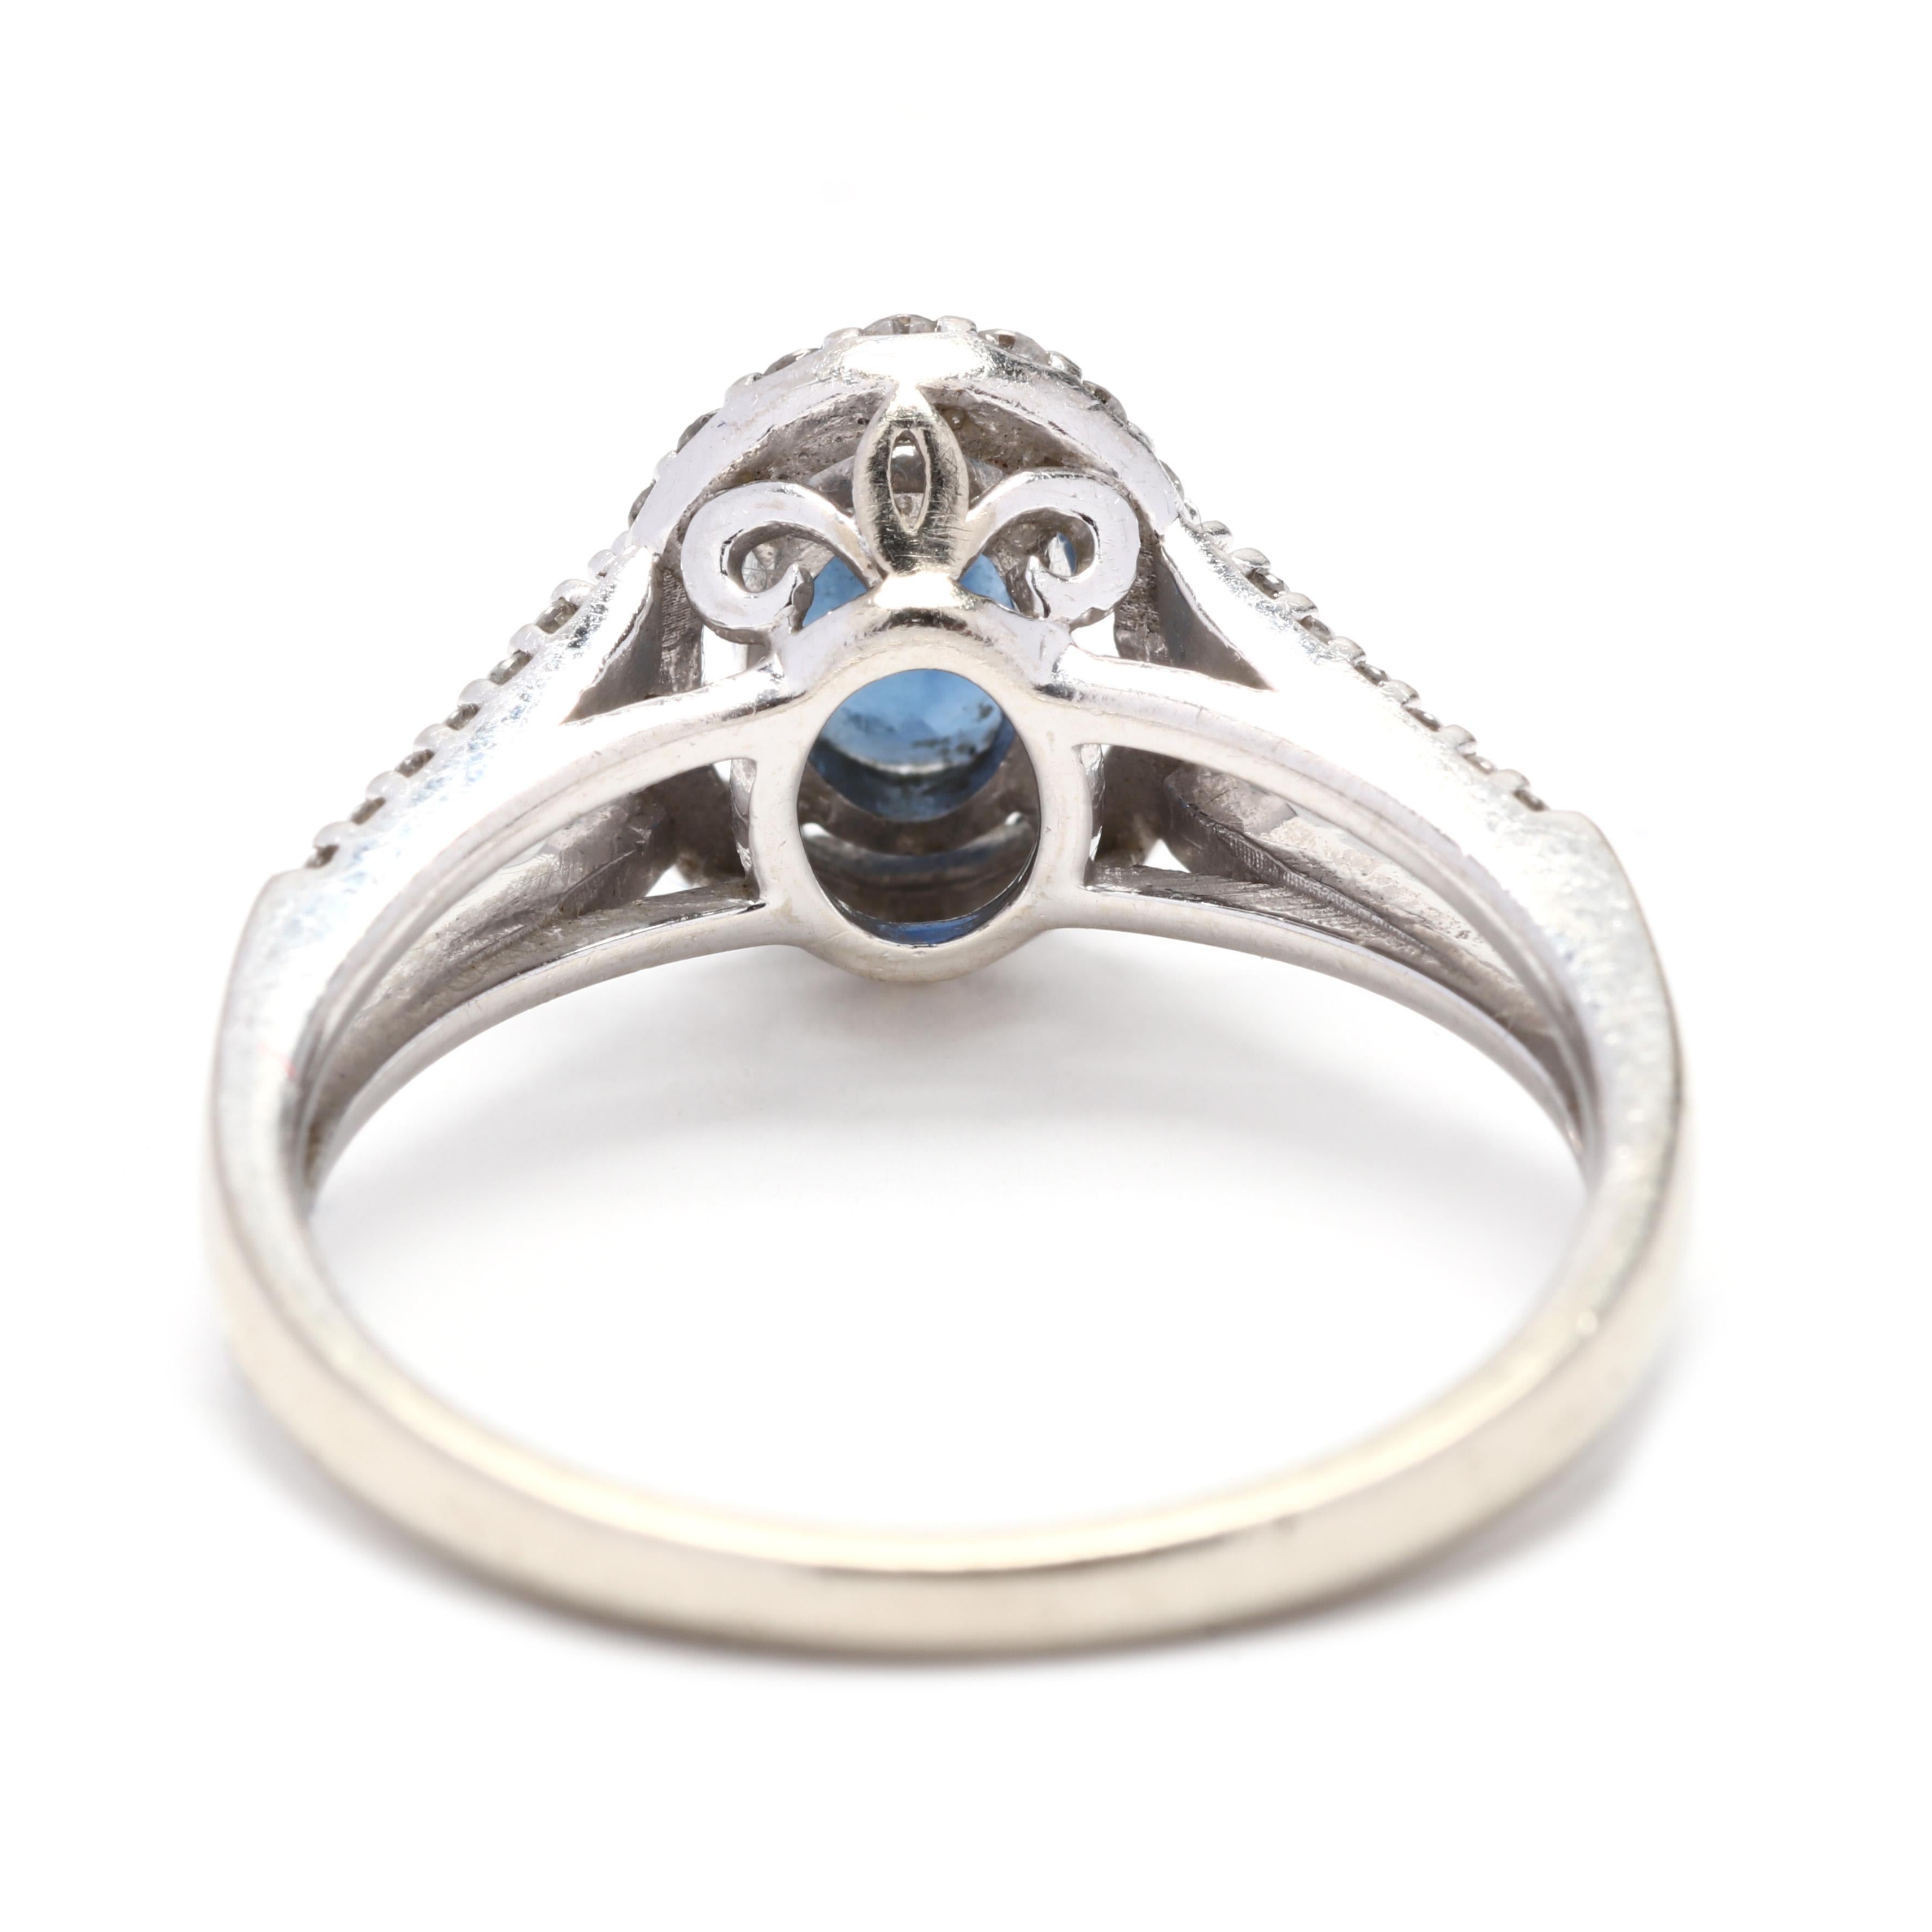 10k white gold ring with blue stone